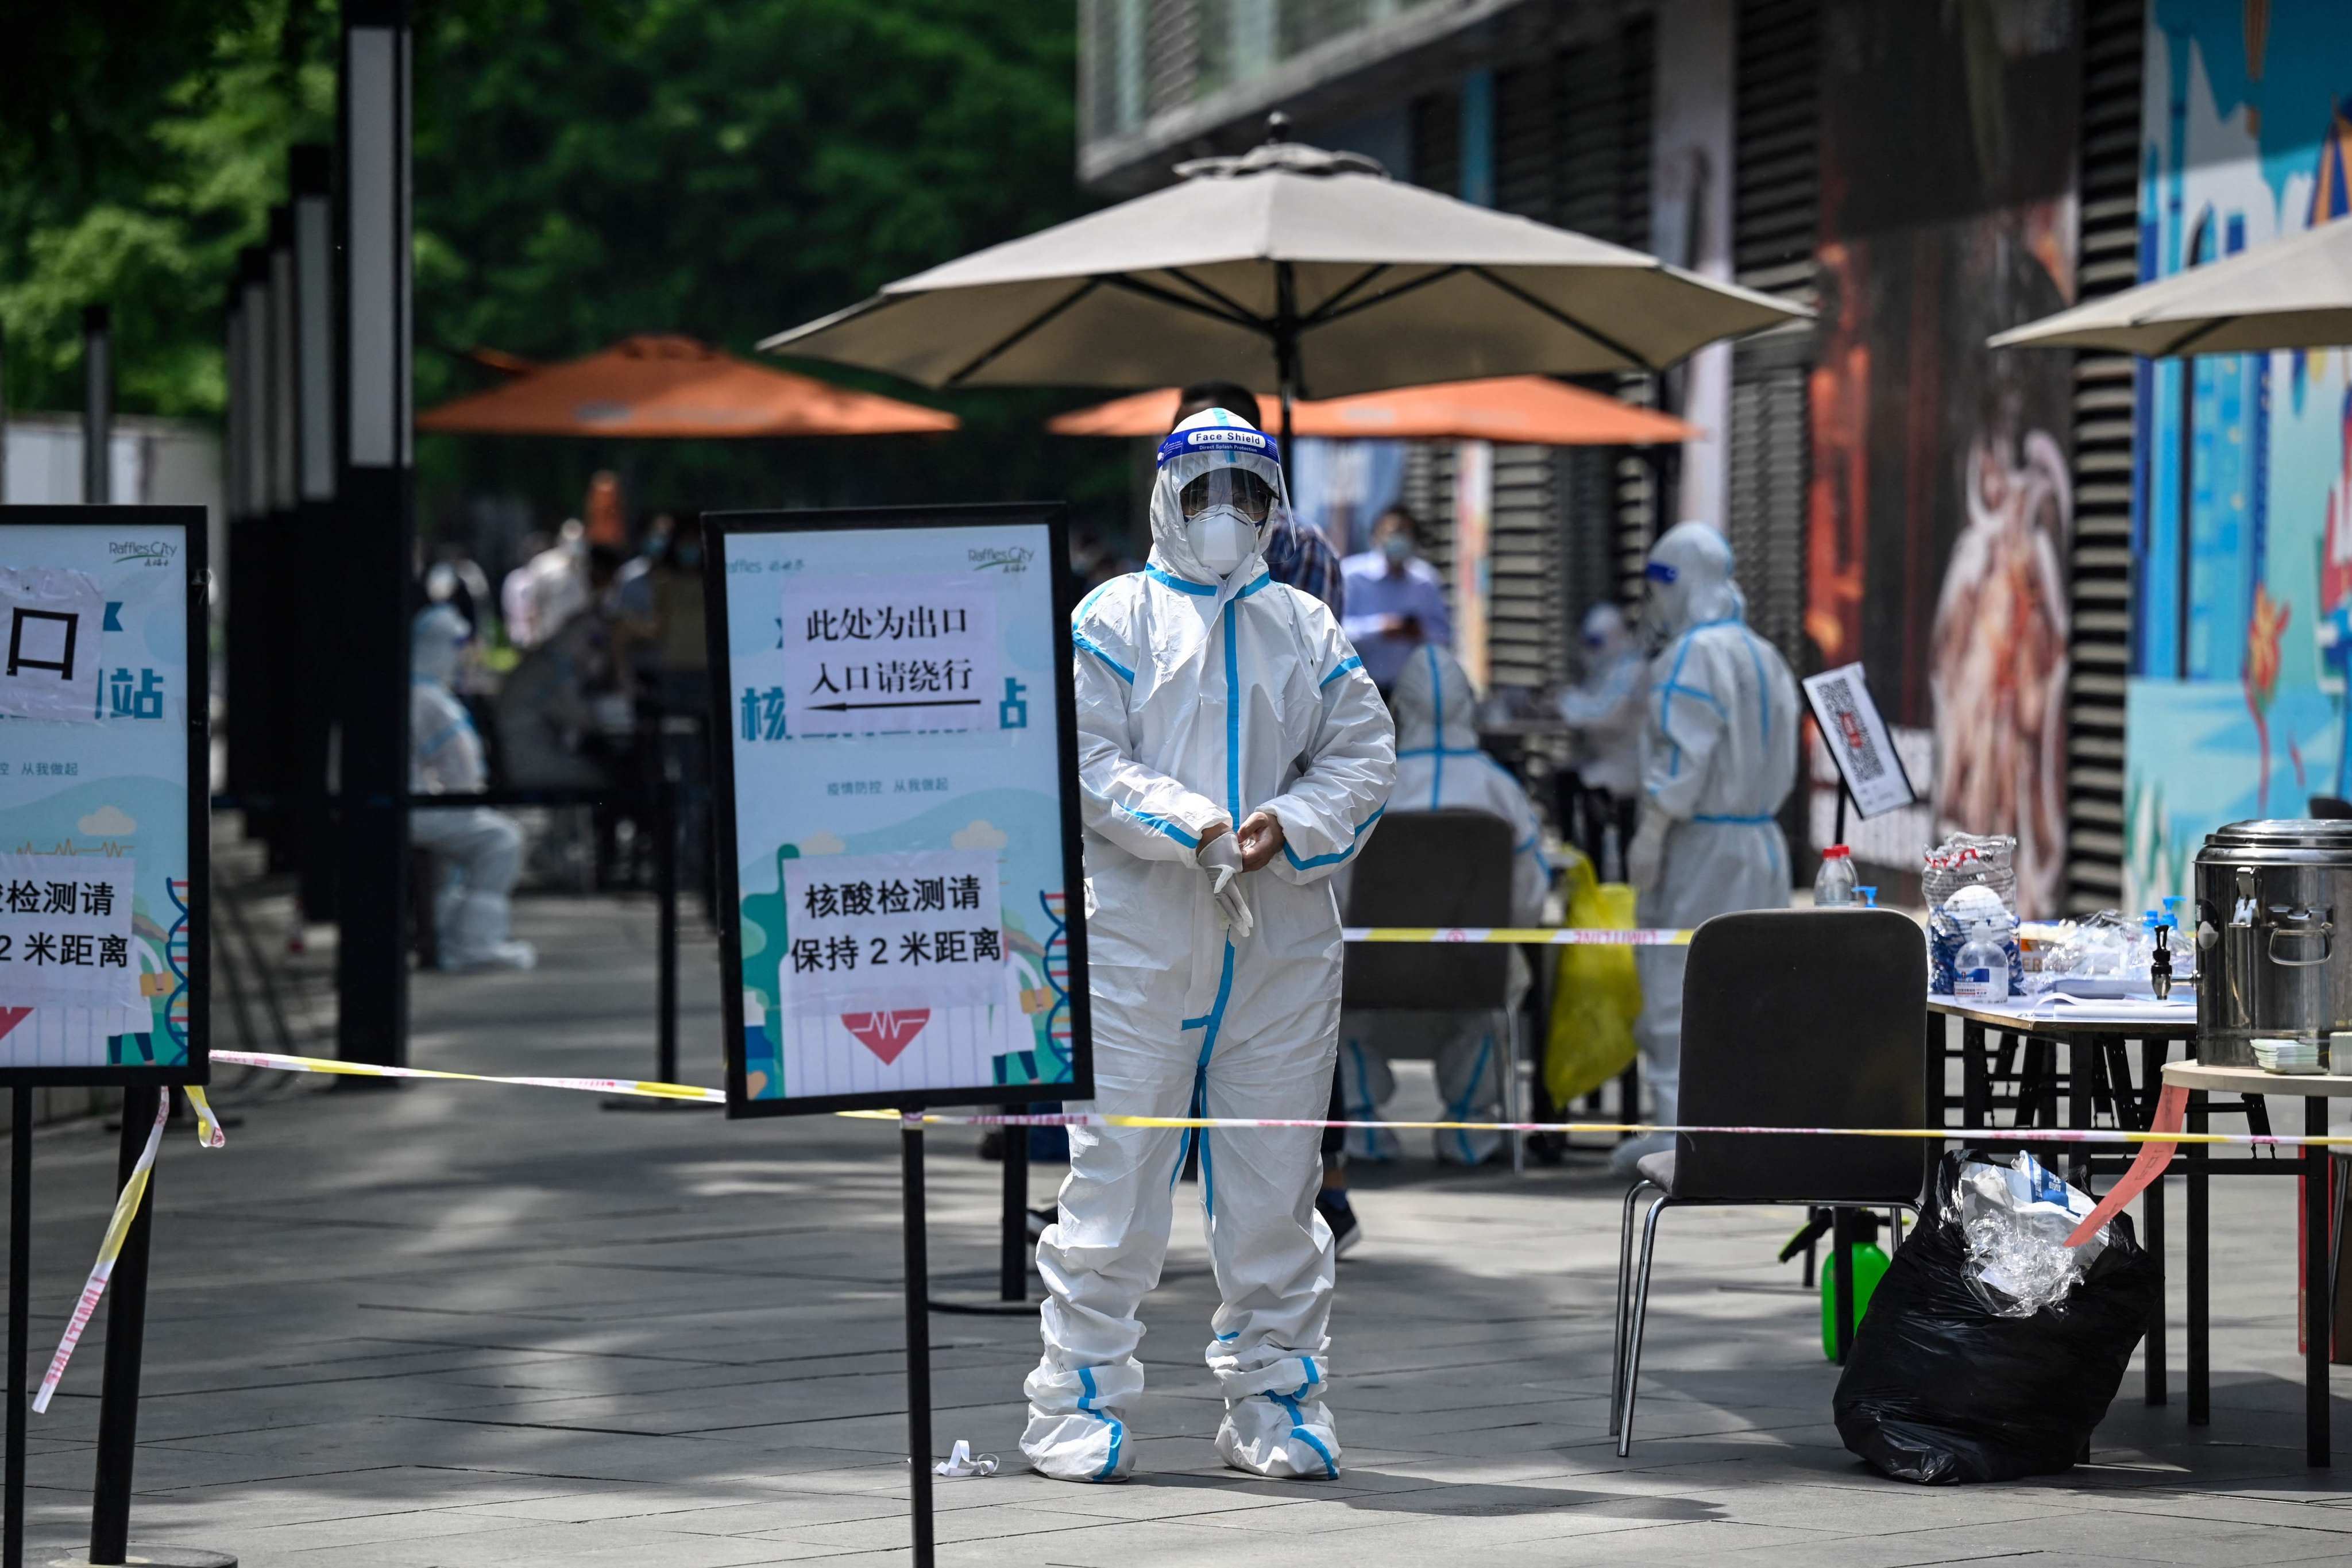 A health worker wearing personal protective equipment stands at a Covid-19 testing site outside a shopping centre in Beijing on Thursday. Photo: AFP